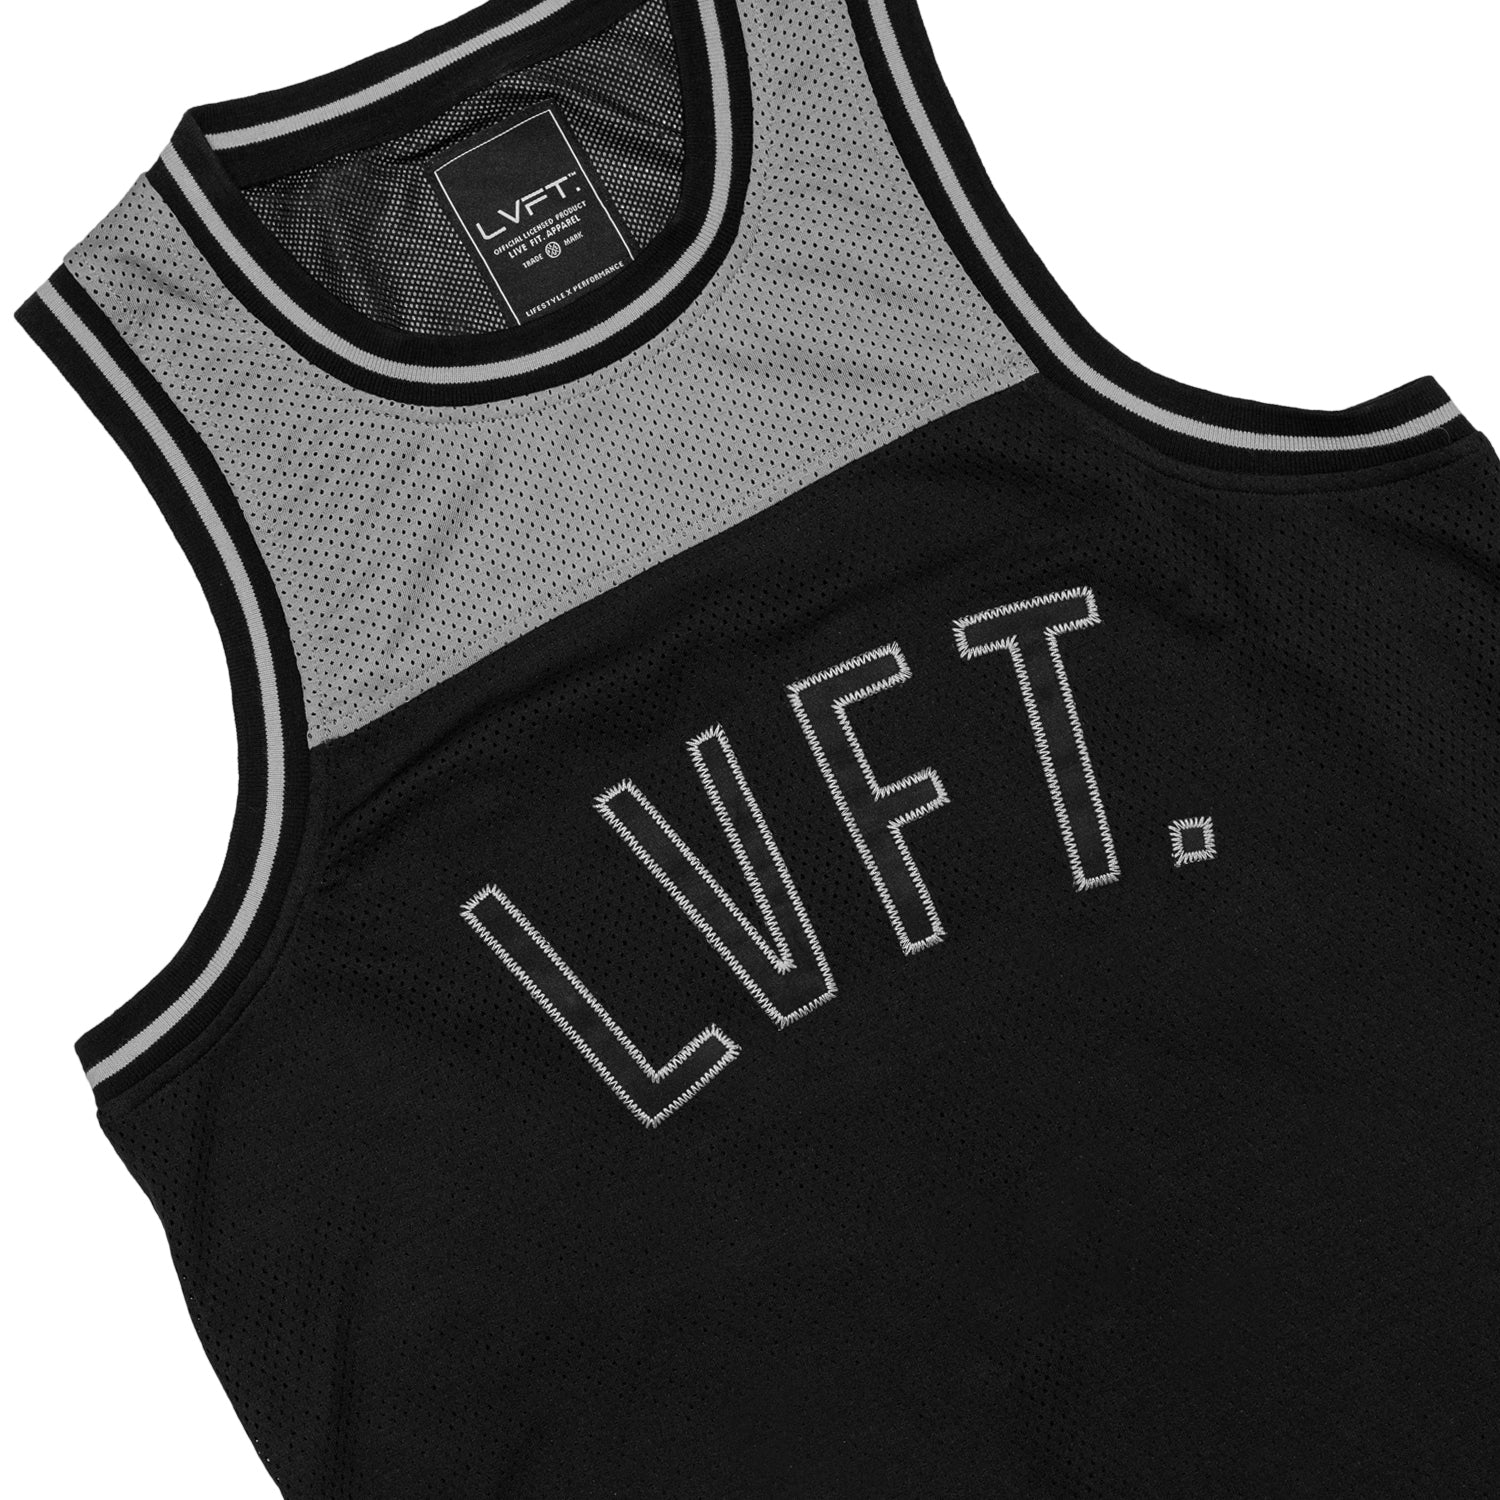 Baseball Jersey - Black  Live fit, Urban outfits, Workout clothes